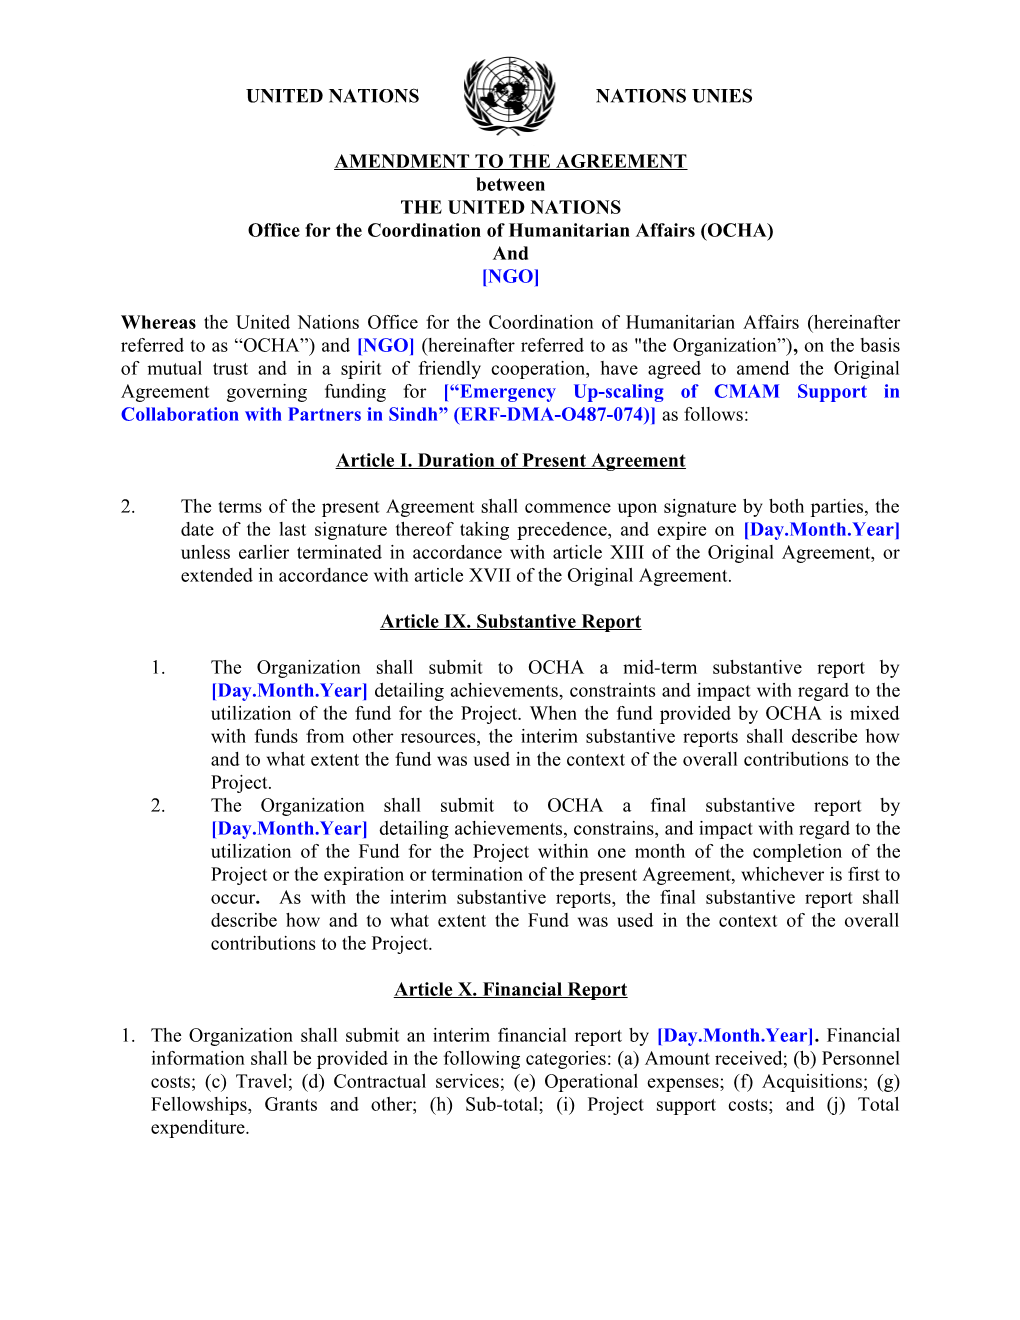 Annex XXII. A. Letter of Acceptance of No-Cost Extension for Ngos (For Long Version)